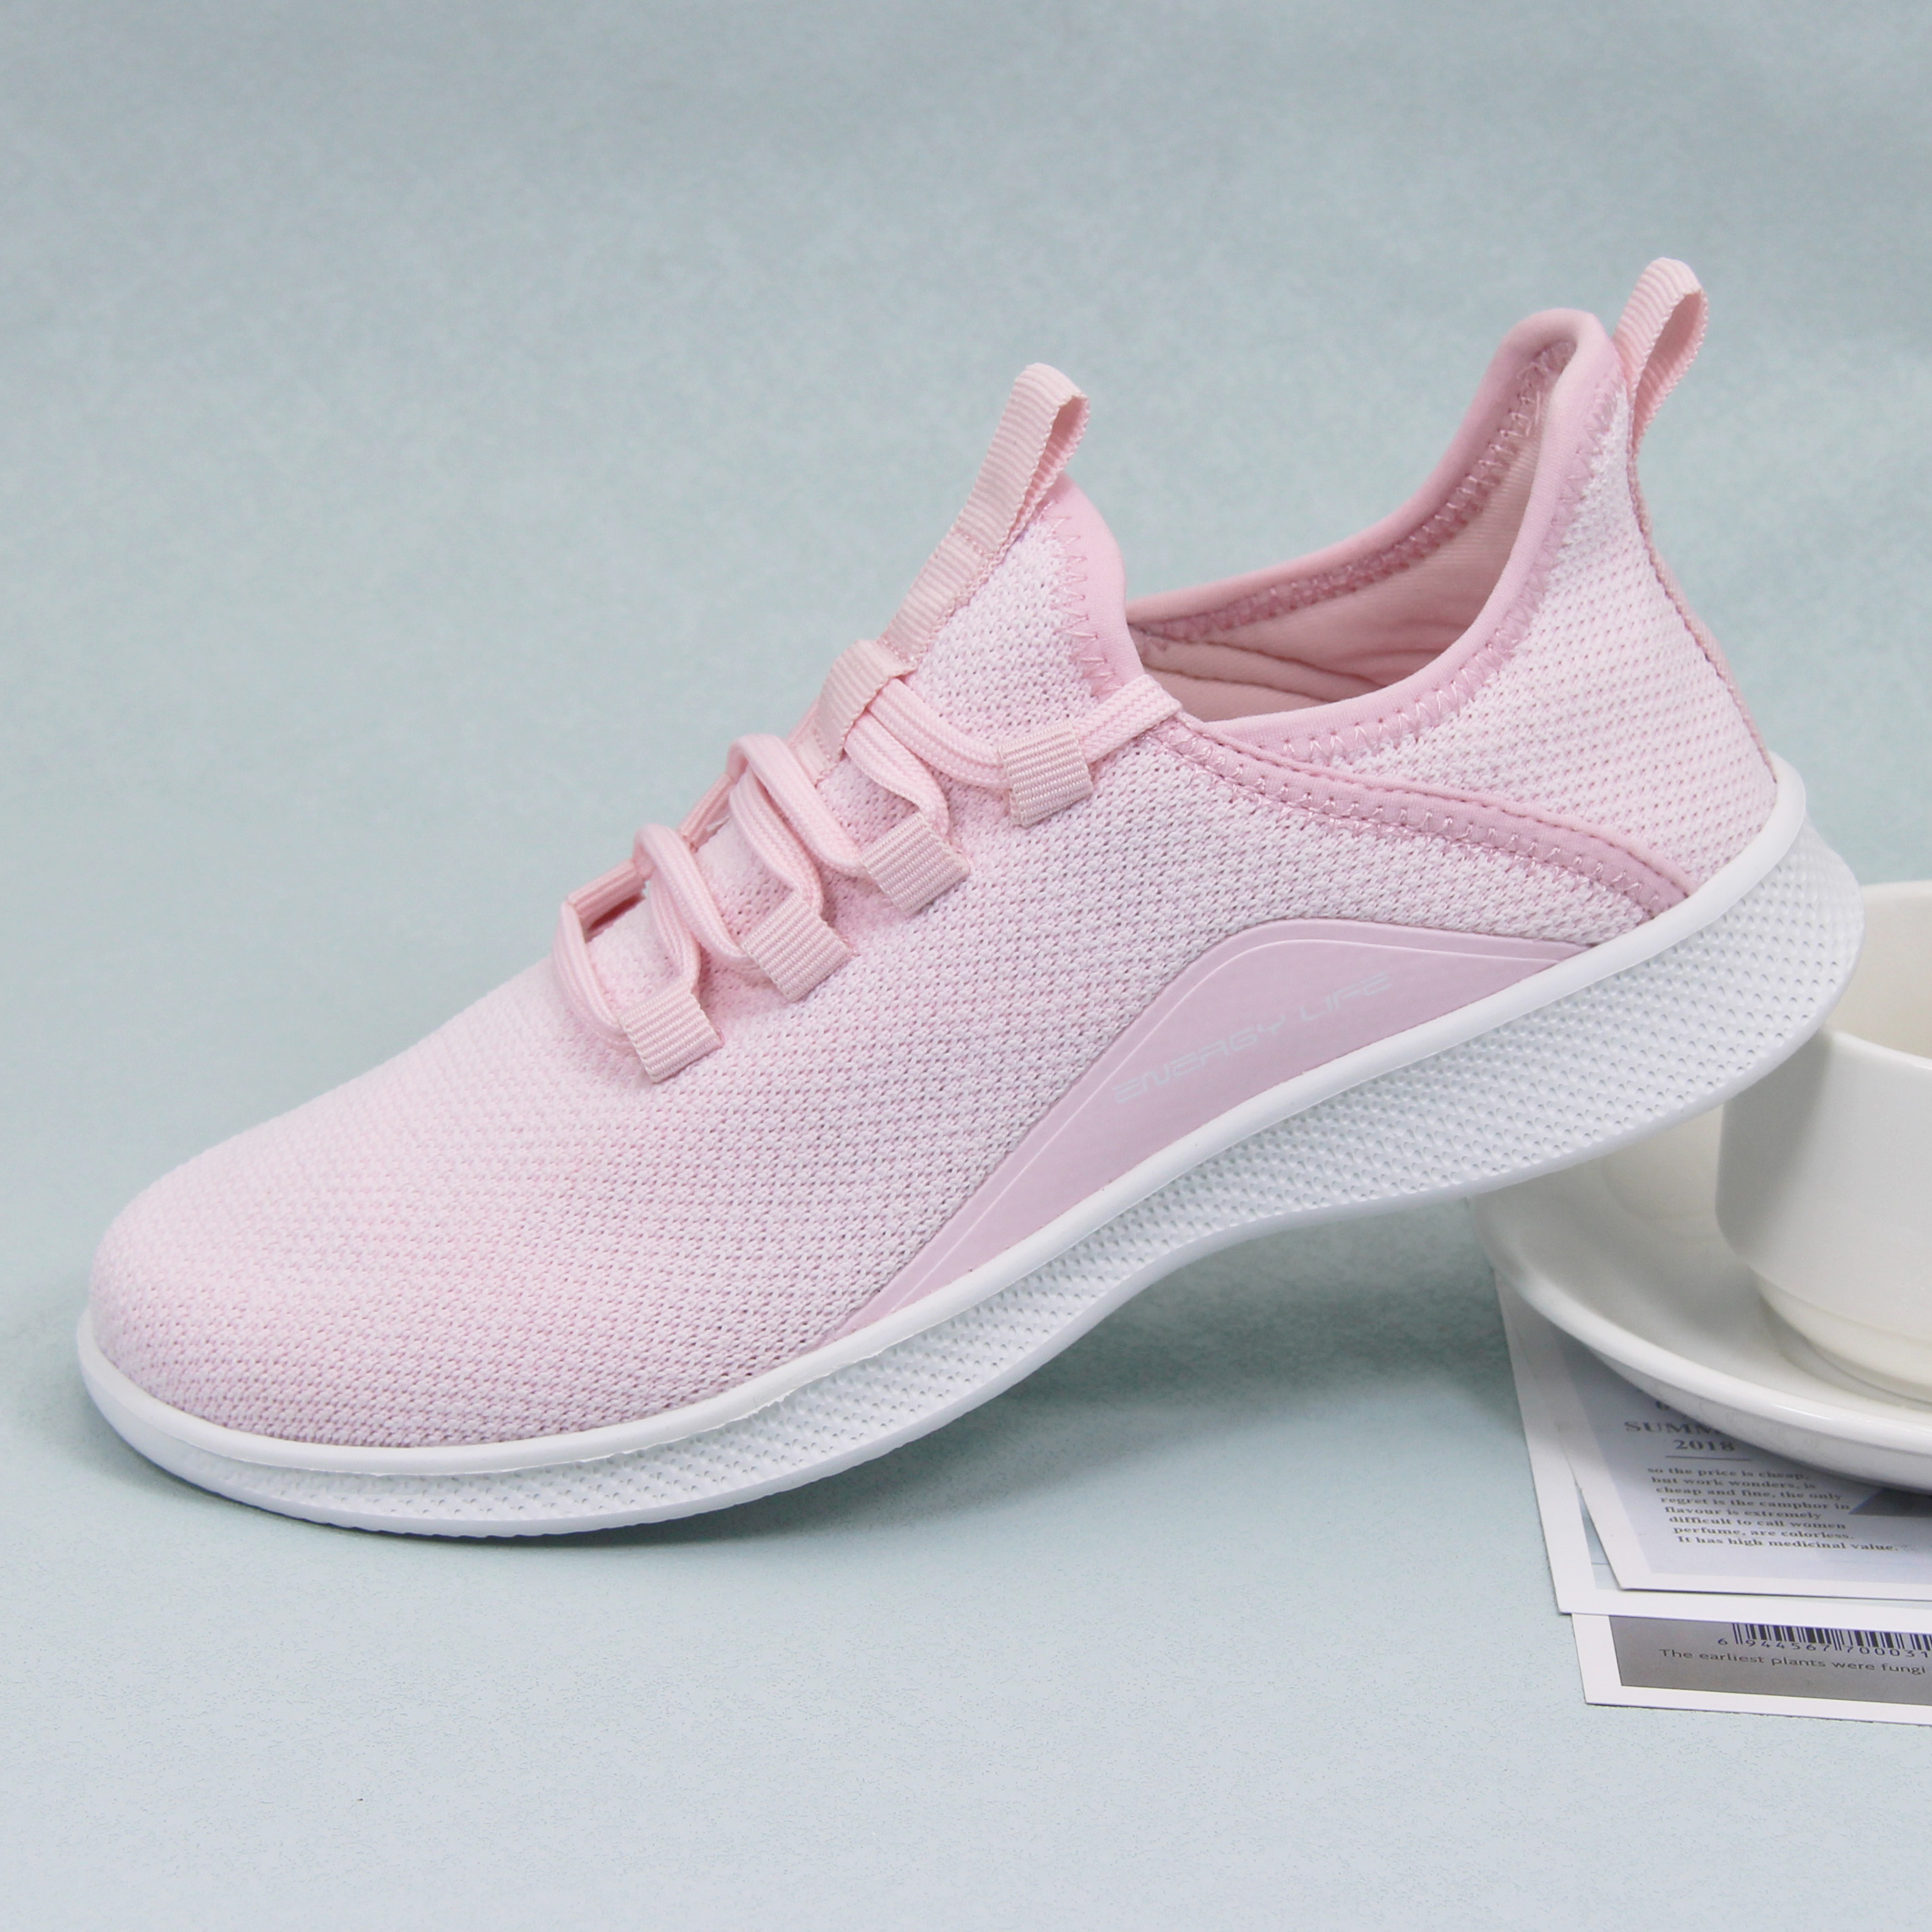 Women's Casual Slip-on Sneakers, Lightweight Lace Up Running Shoes, Knitted Low Top Sneakers - Germany